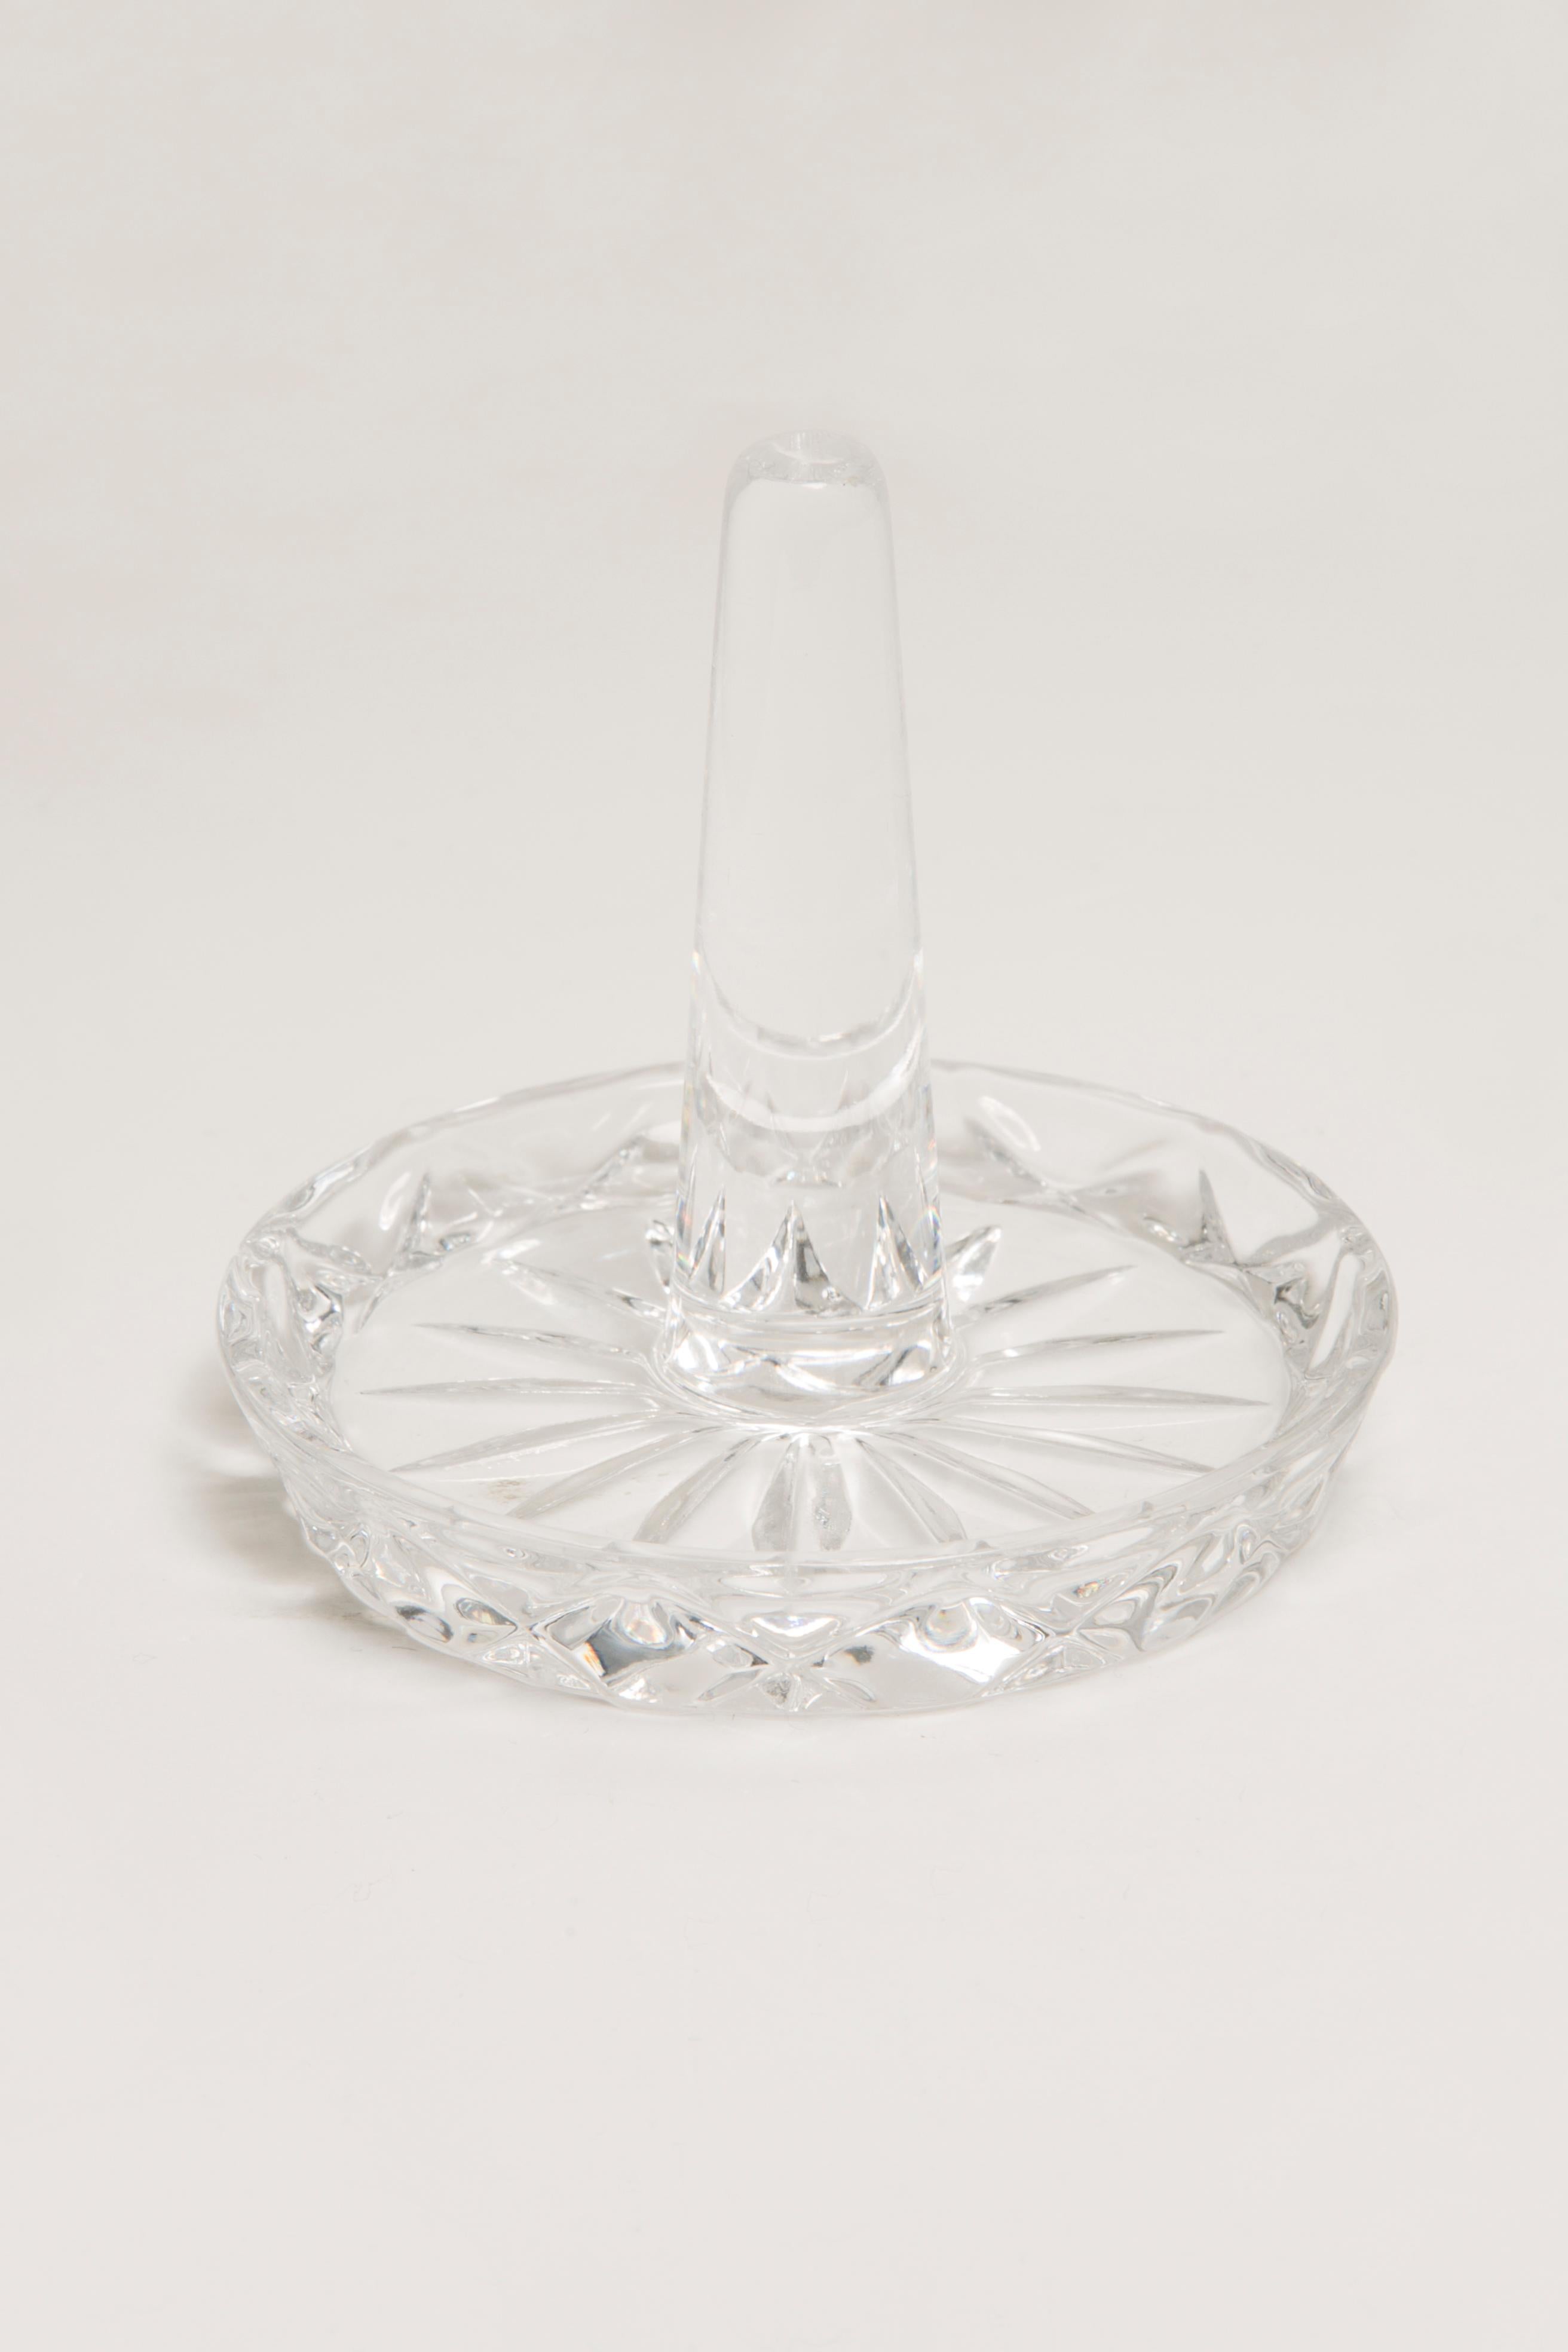 Vintage Crystal Glass Hanger Ring Stand, Europe, 1960s 1